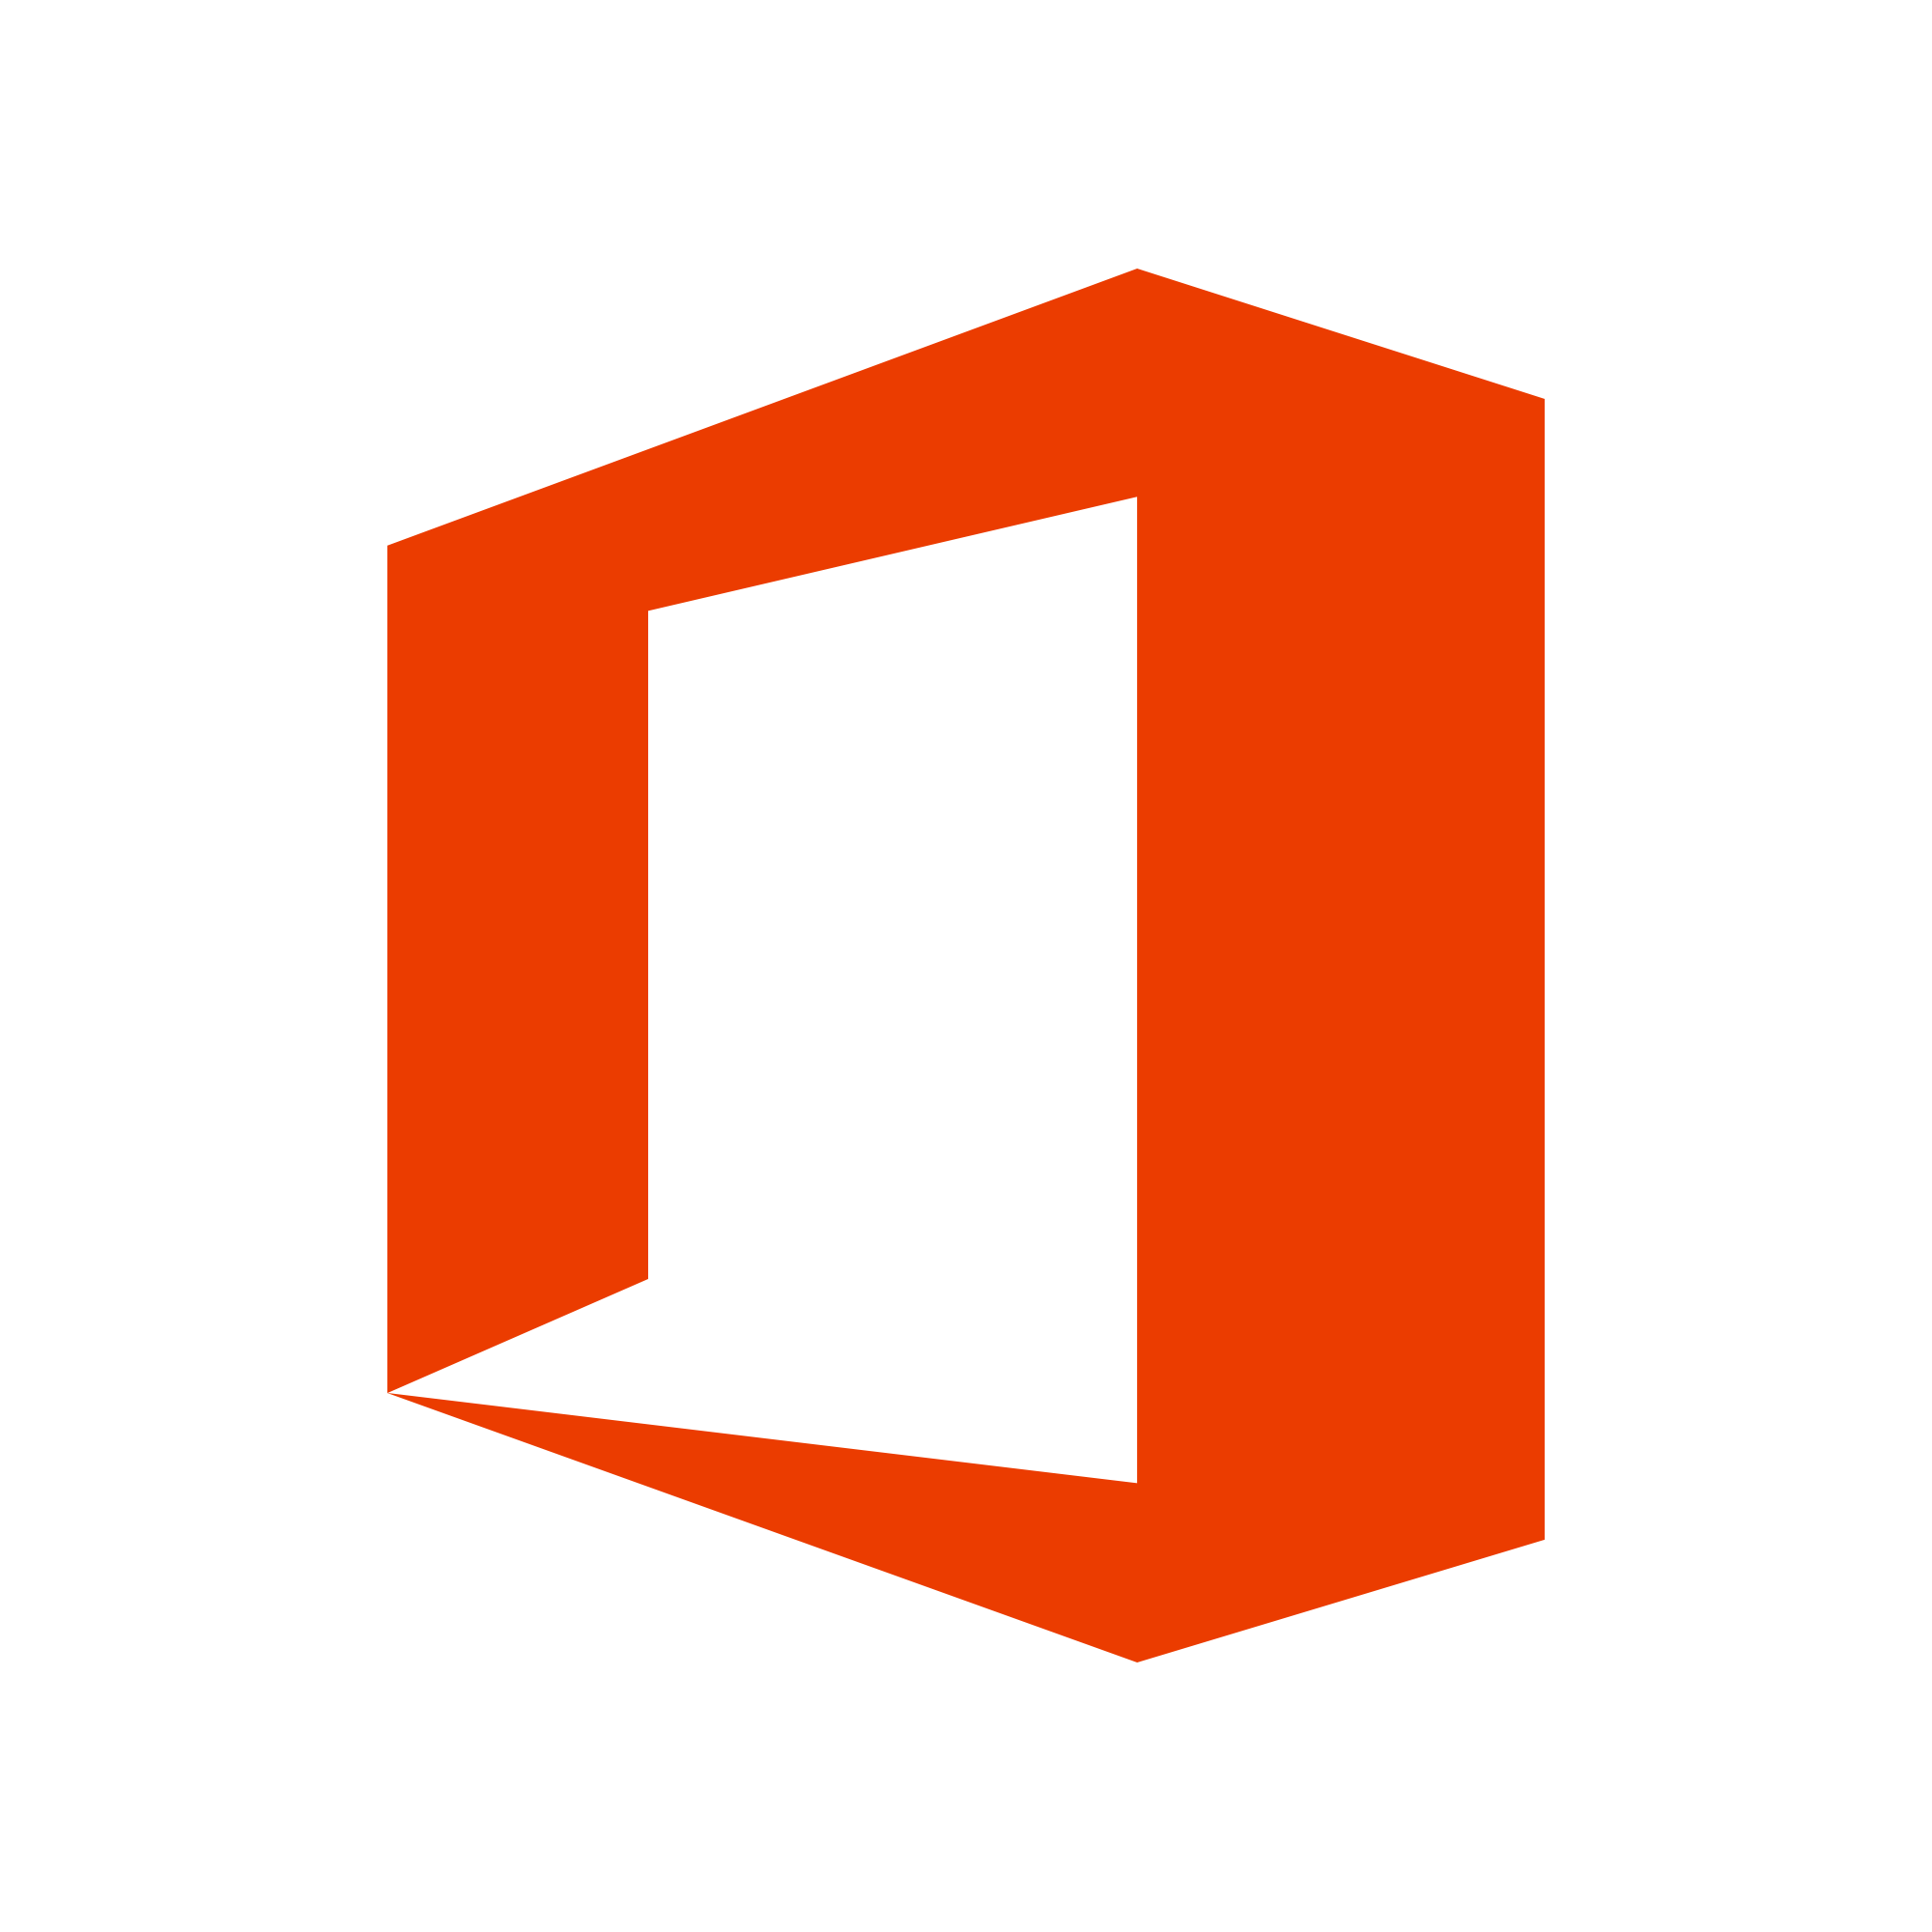 Overview of the Microsoft Office 365 Productivity Apps Course – Virtual